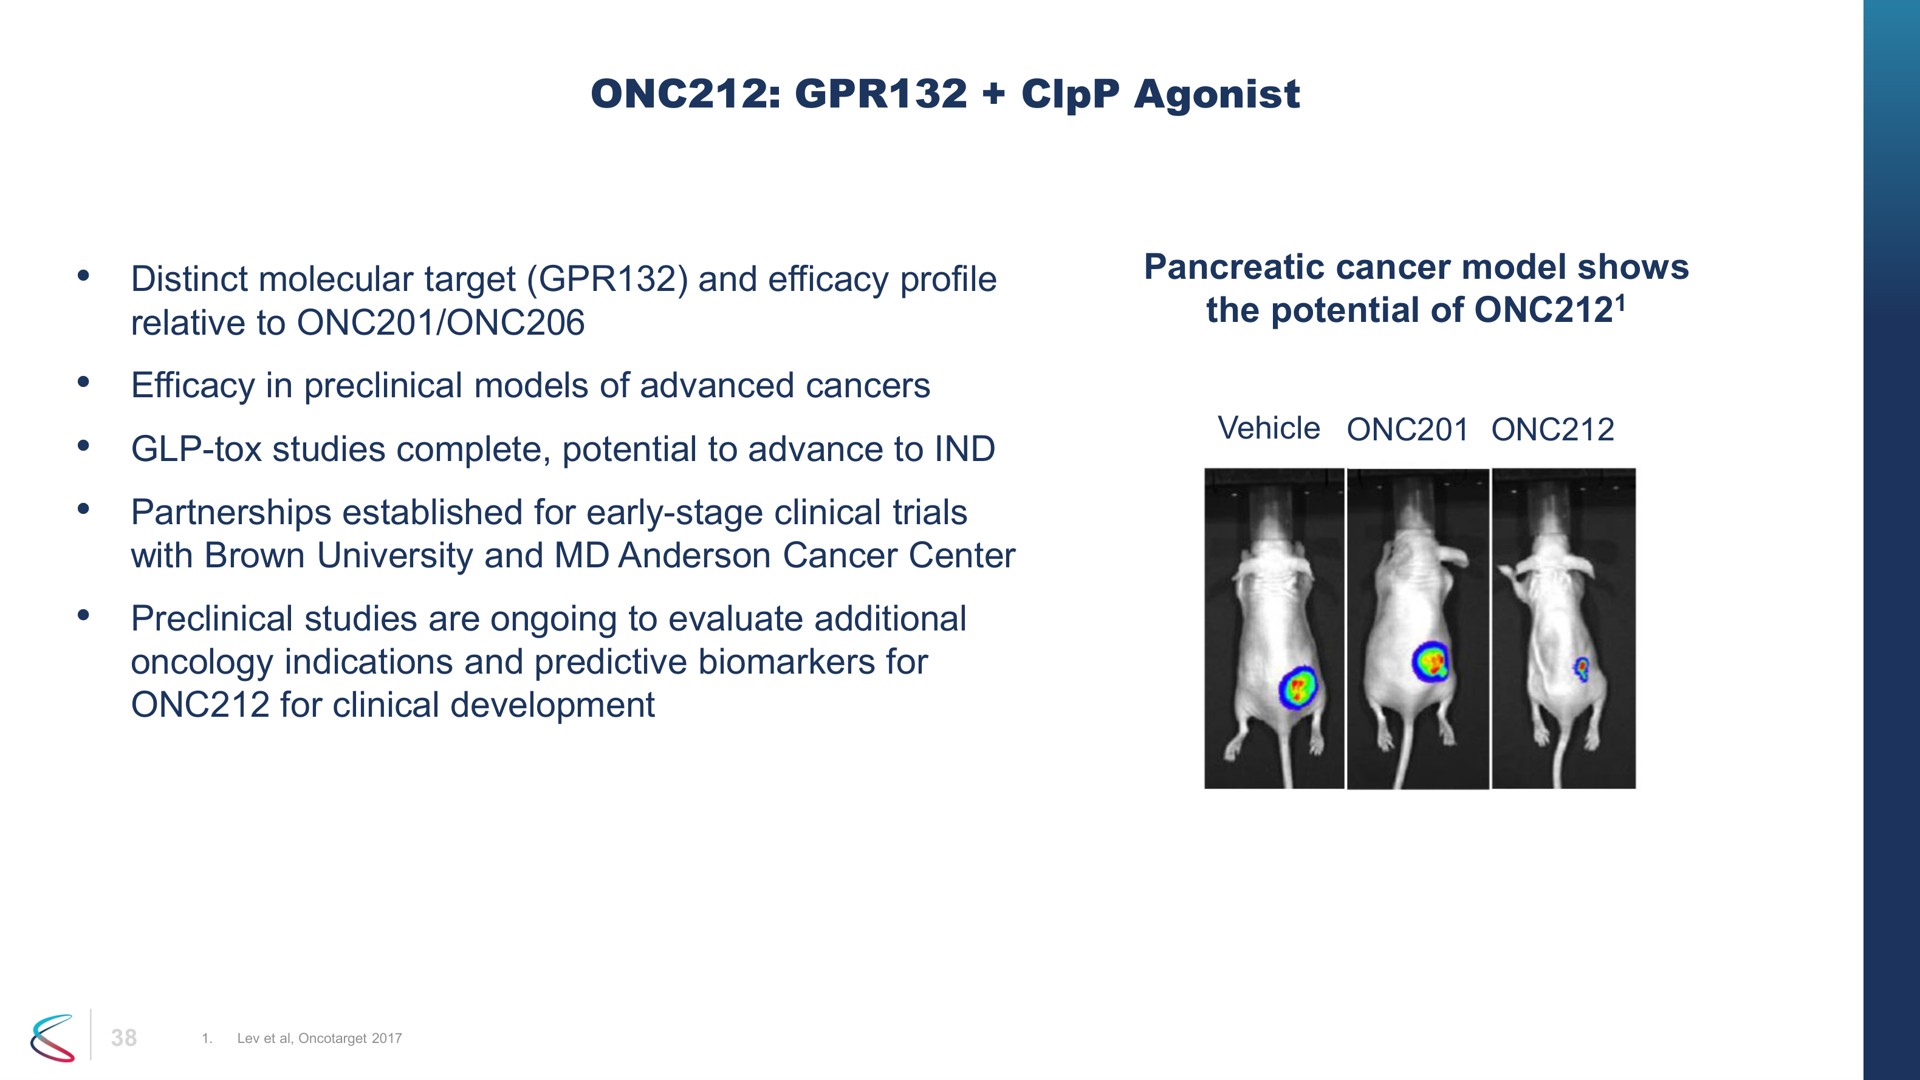 agonist distinct molecular target and efficacy profile relative to efficacy in preclinical models of advanced cancers tox studies complete potential to advance to partnerships established for early stage clinical trials with brown university and cancer center preclinical studies are ongoing to evaluate additional oncology indications and predictive for for clinical development pancreatic cancer model shows the potential of | Chimerix